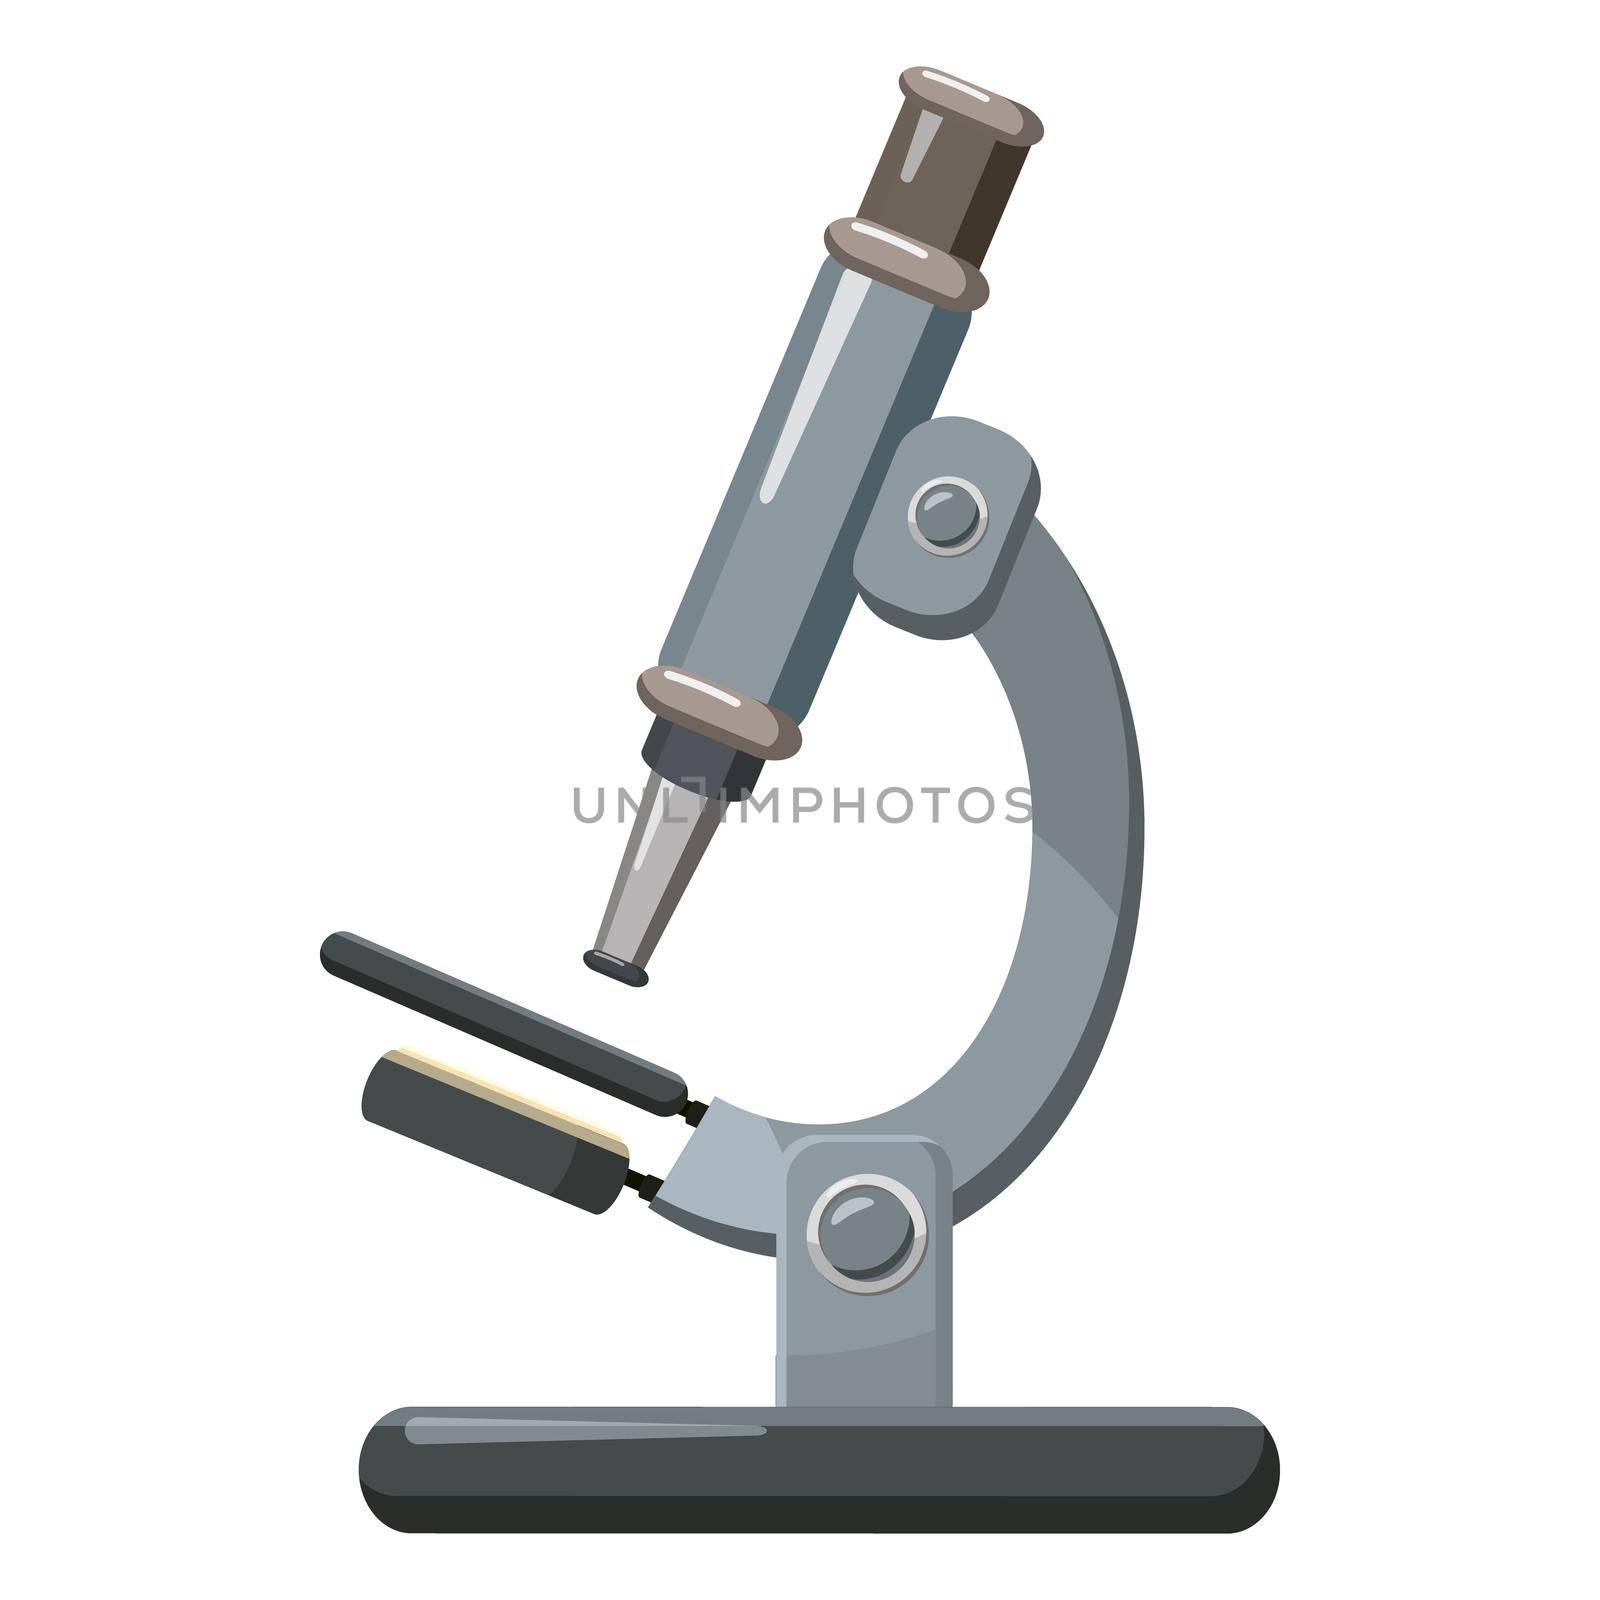 Microscope icon, cartoon style by ylivdesign